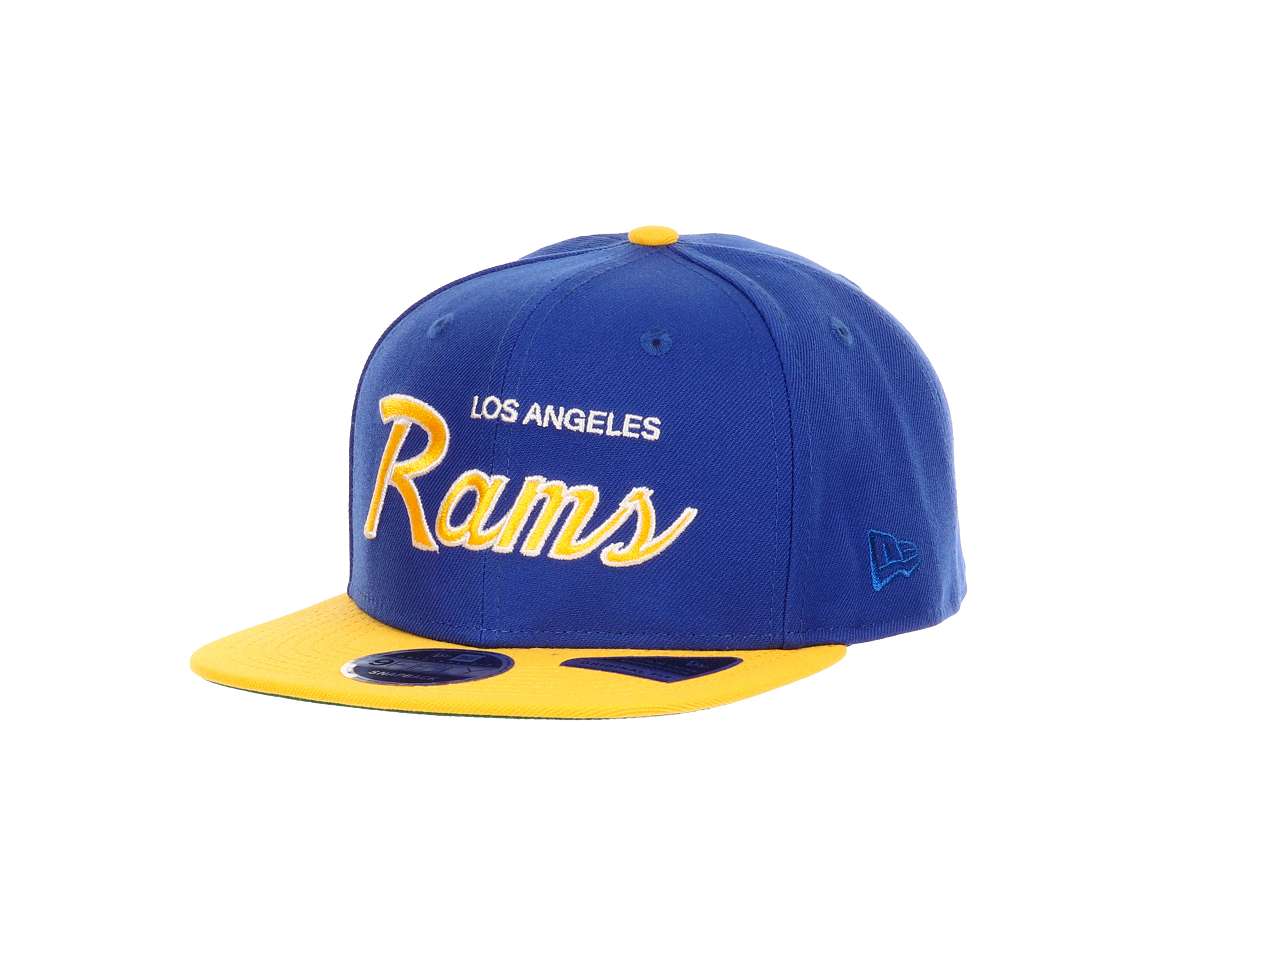 Los Angeles Rams NFLMajestic Blue Rams Sidepatch 9Fifty Original Fit Snapback Cap New Era